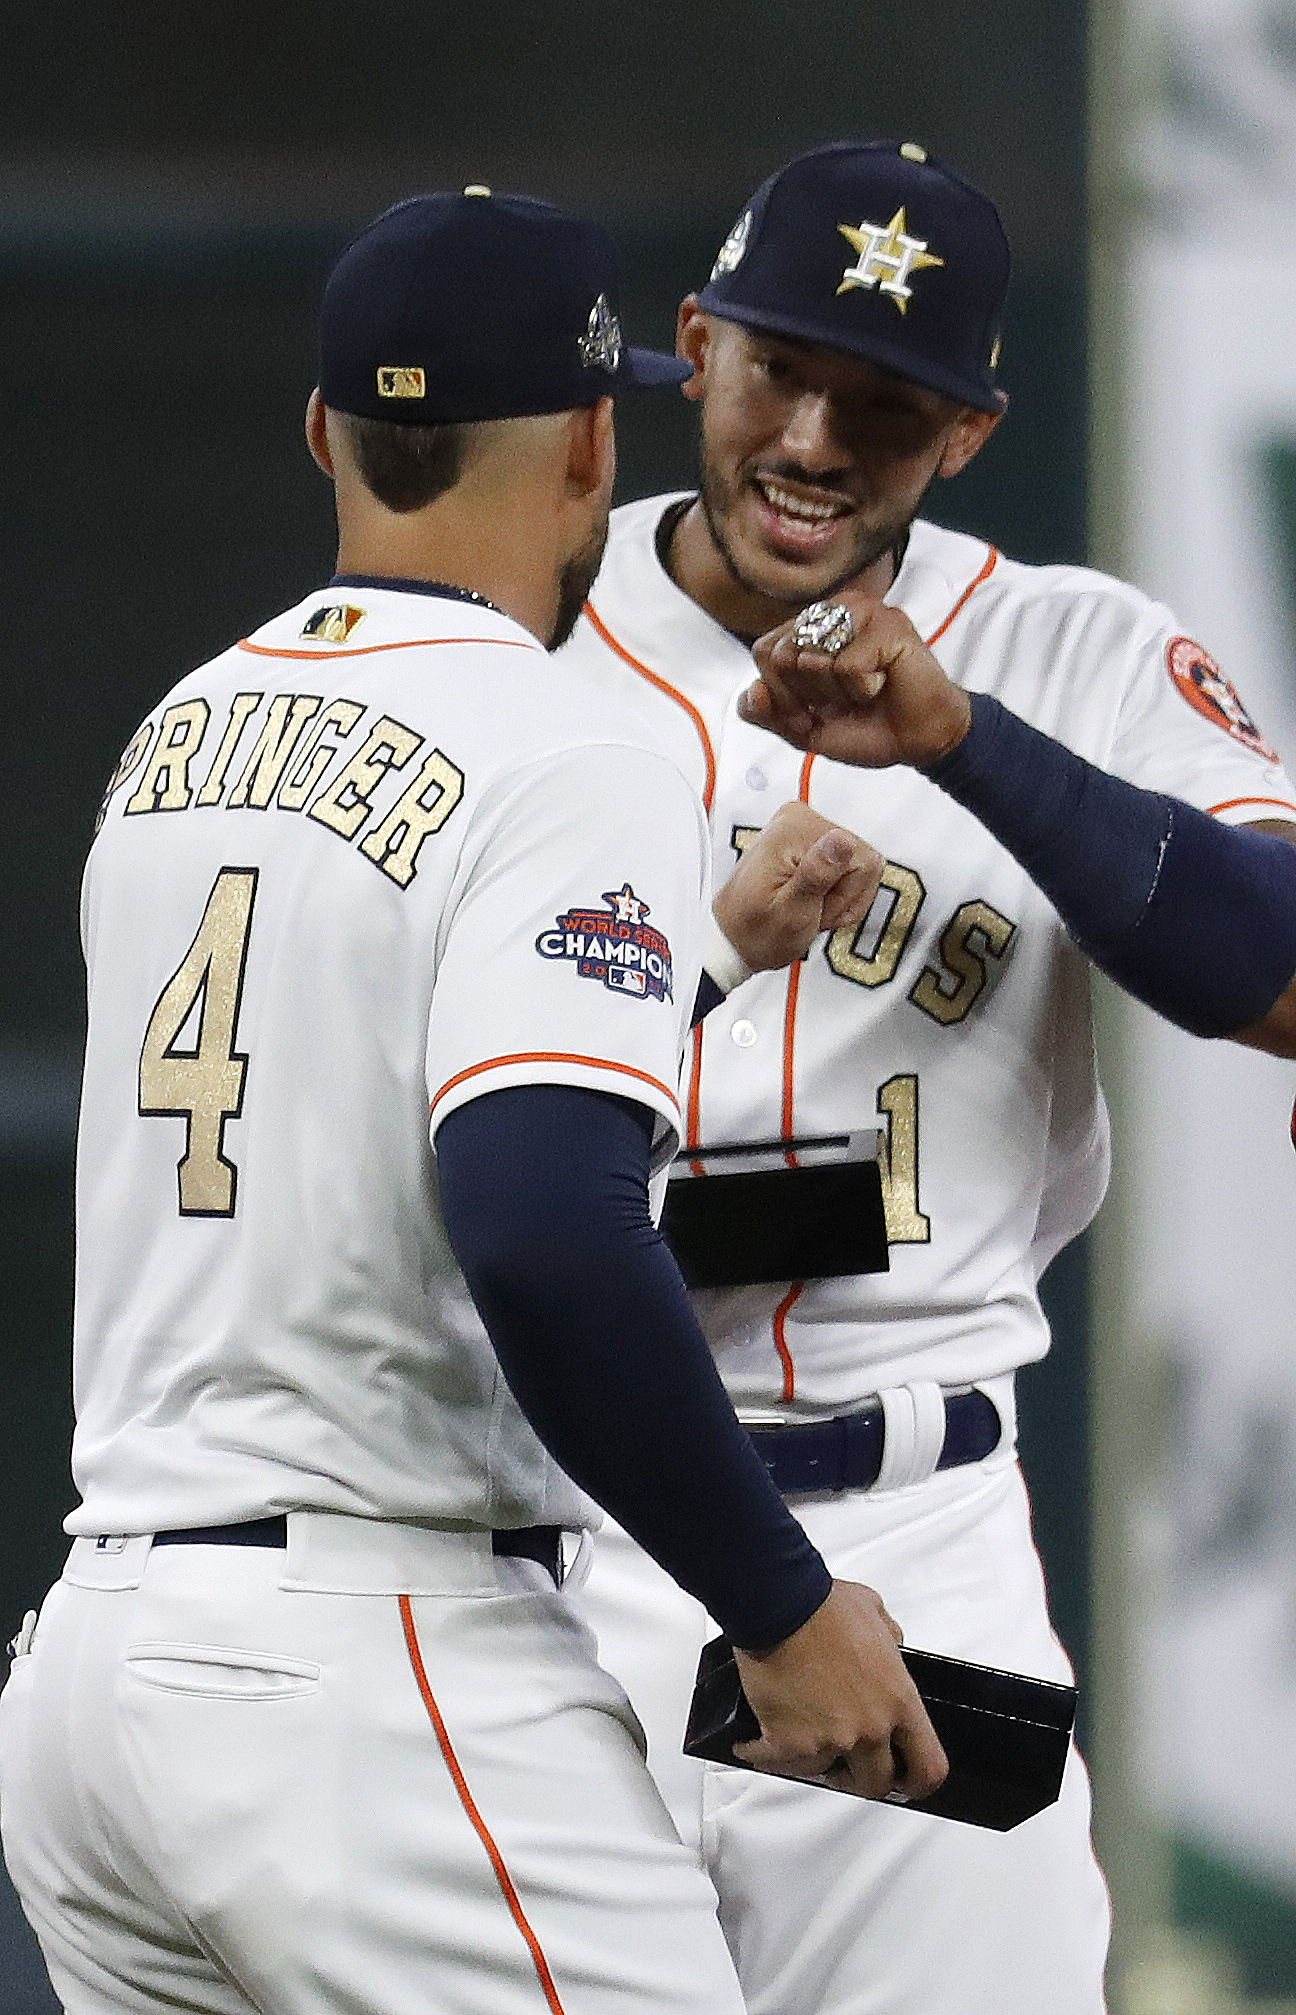 Astros to give away World Series replica rings Sept. 17